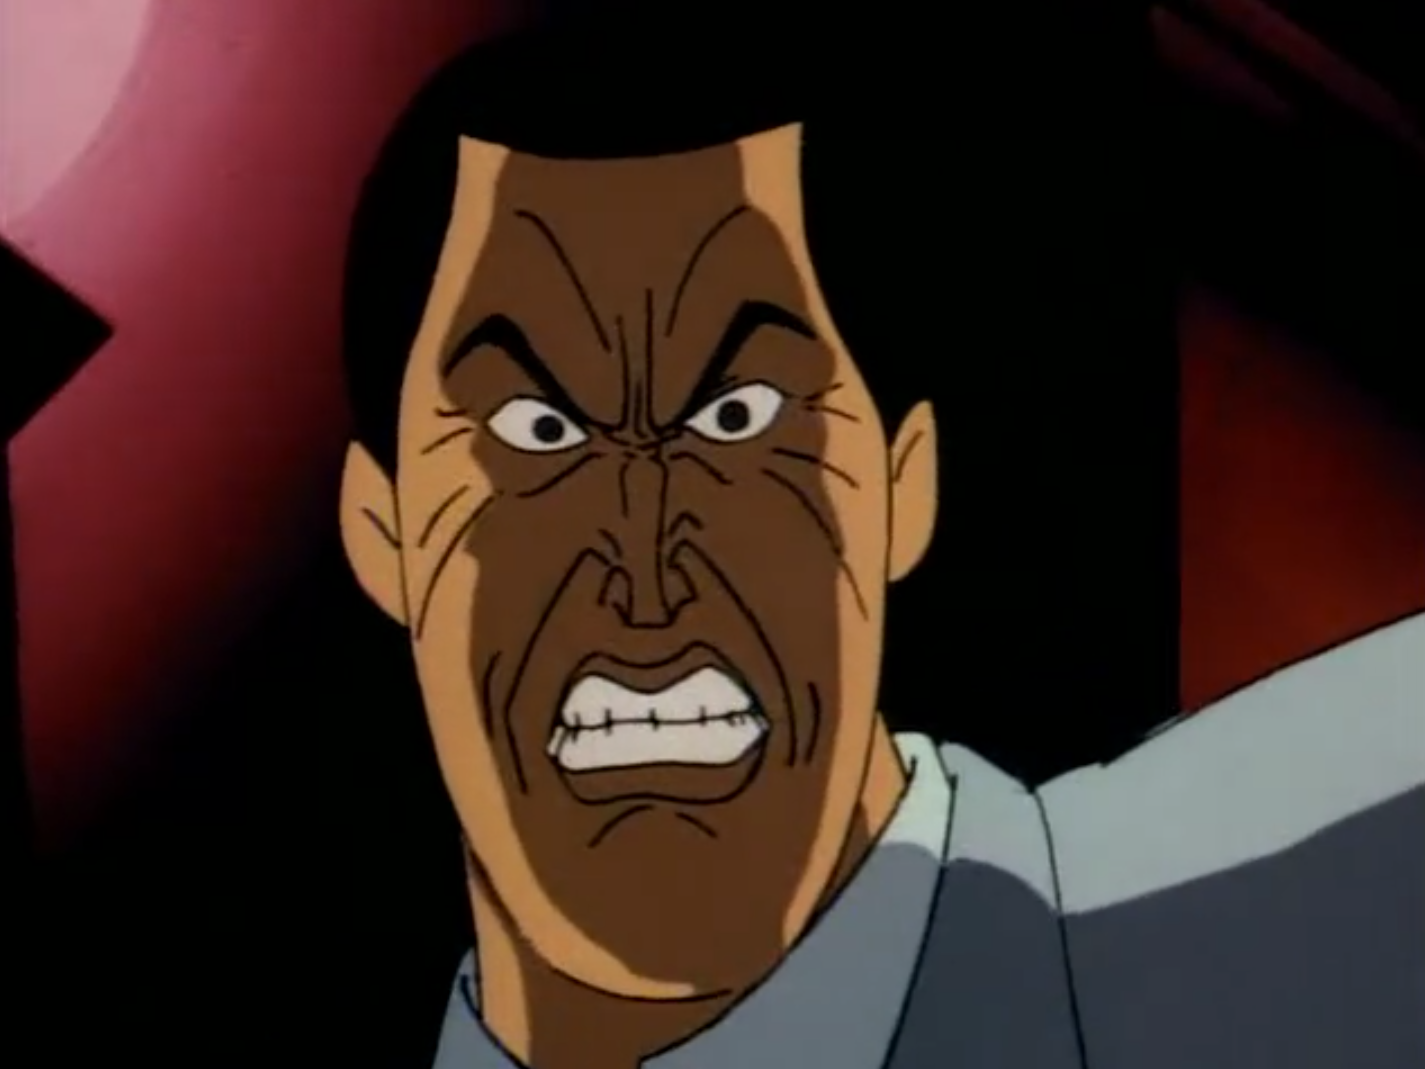 Harvey Dent loses control of his rage in "Two-Face: Part 1" from Batman: The Animated Series.